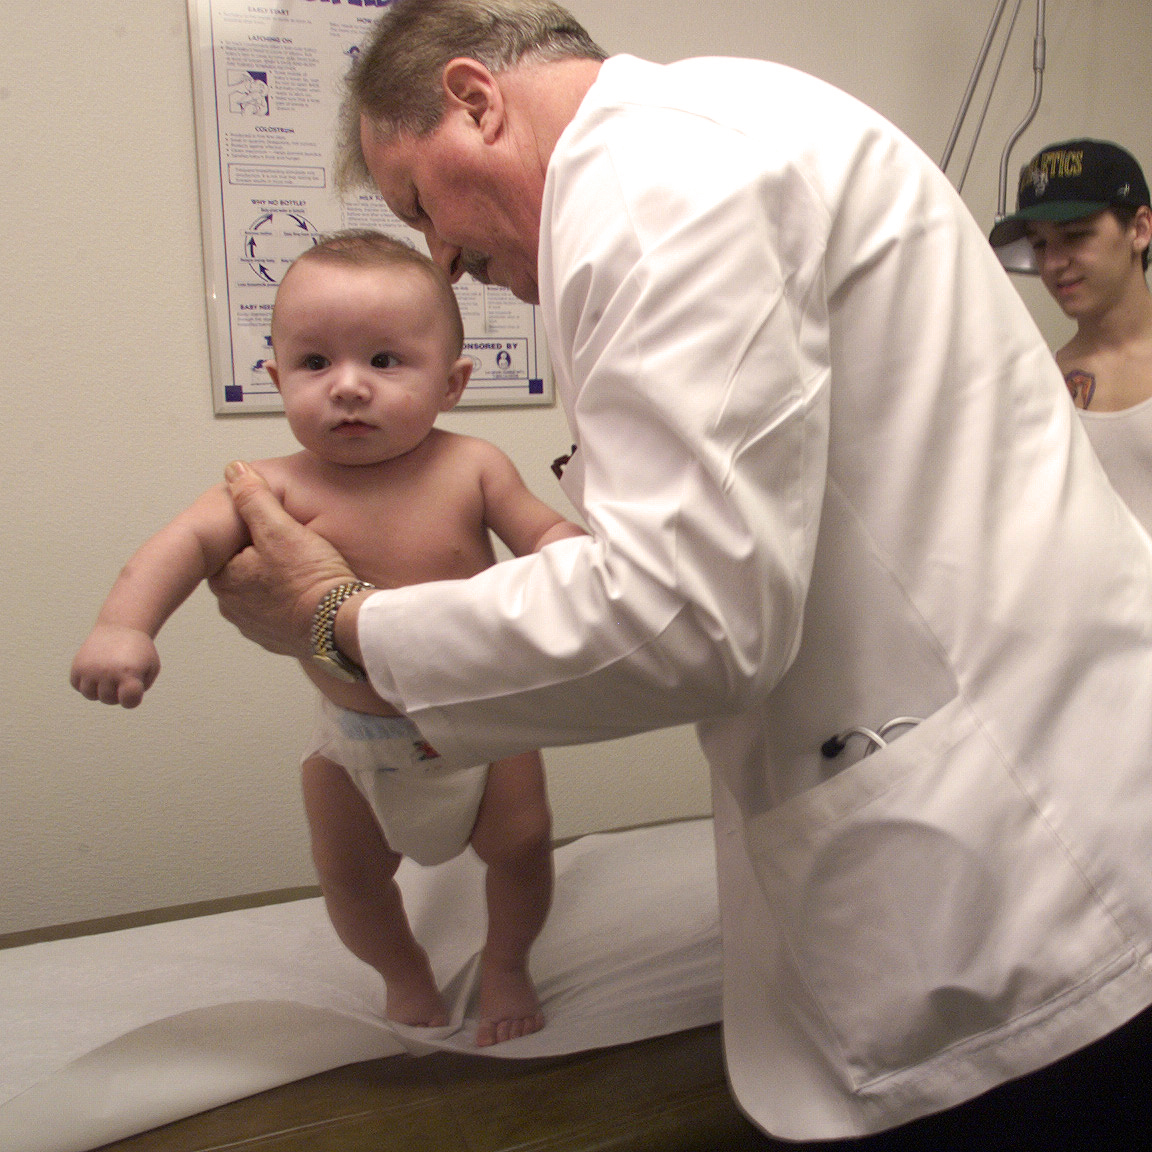 John Betz, an Othello physician's assistant, does a well-infant examination on 4-month old Dominic Sheriff as his parents, Kyrone and Lisa Sheriff, watch. The Washington Rural Health Association has named Betz and colleague Paul Snyder practitioners of the year.